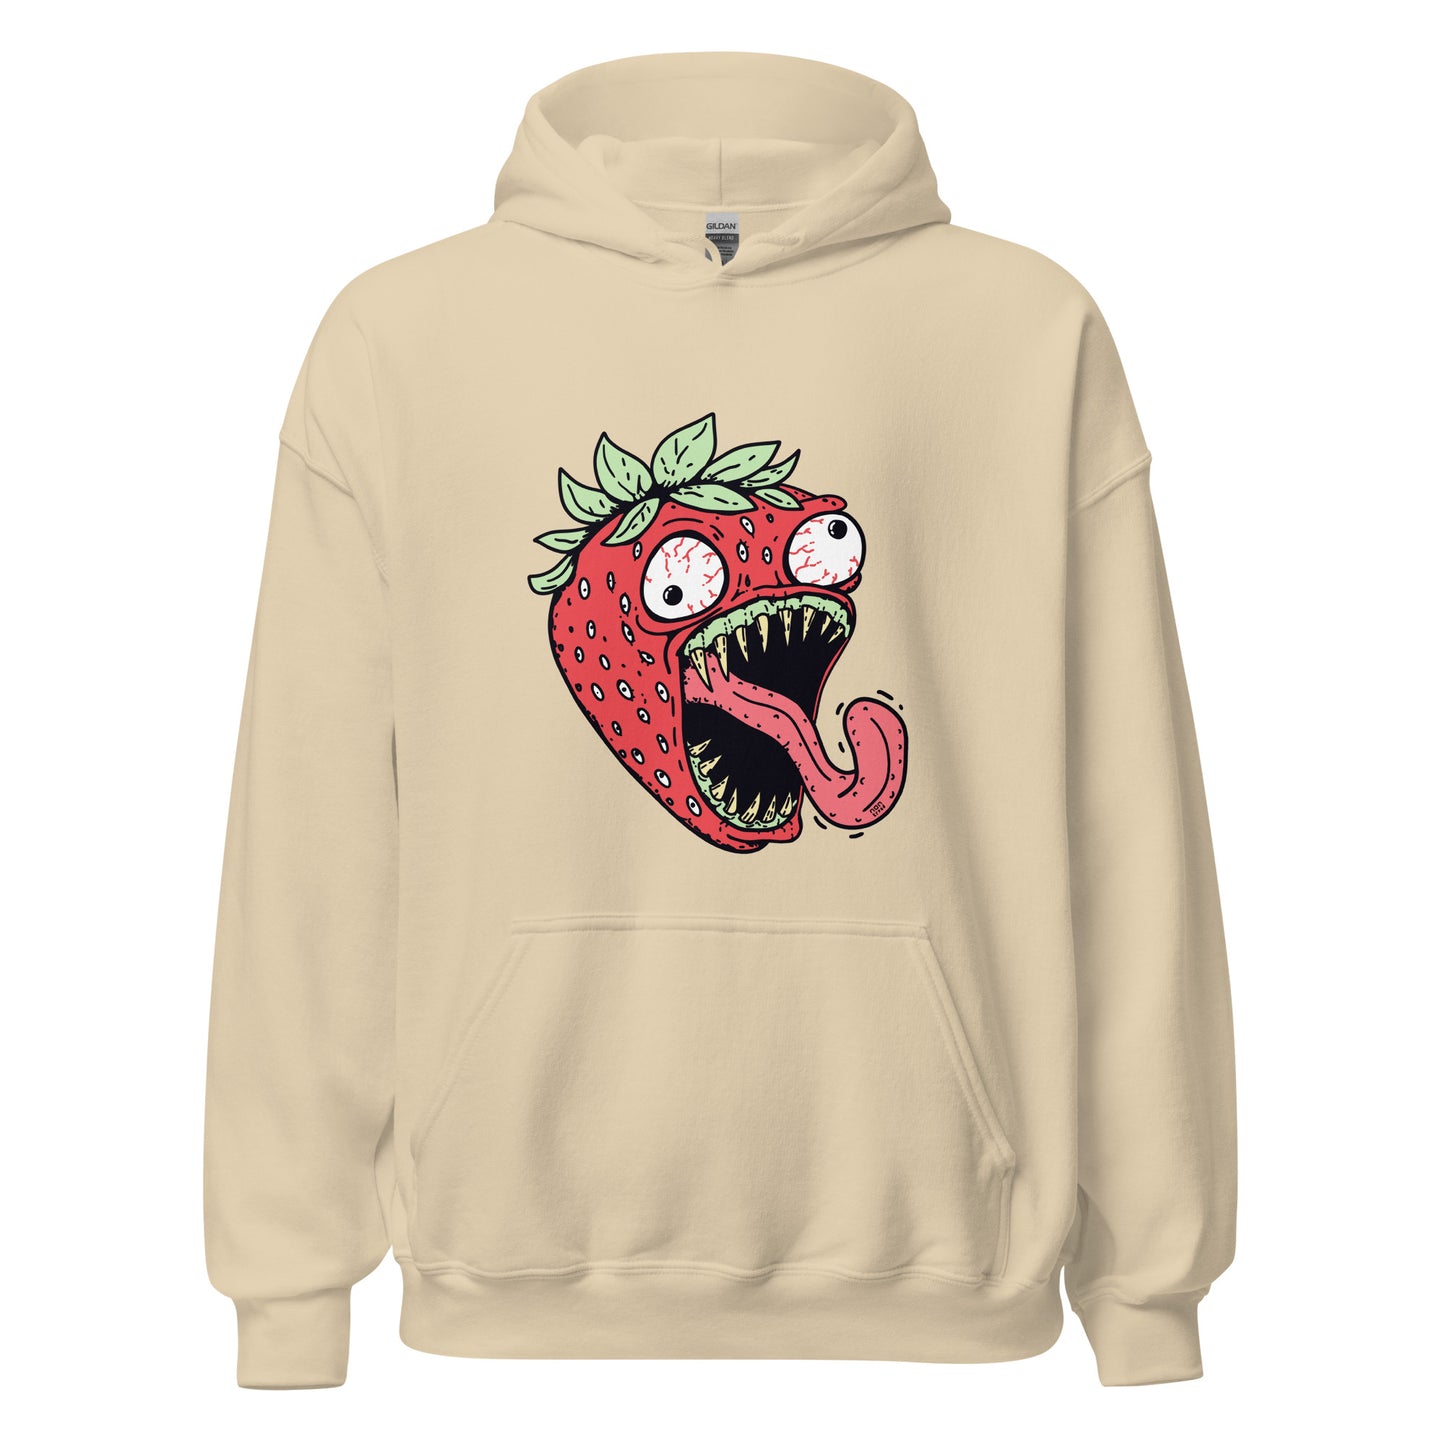 The Strawberry Face Hoodie